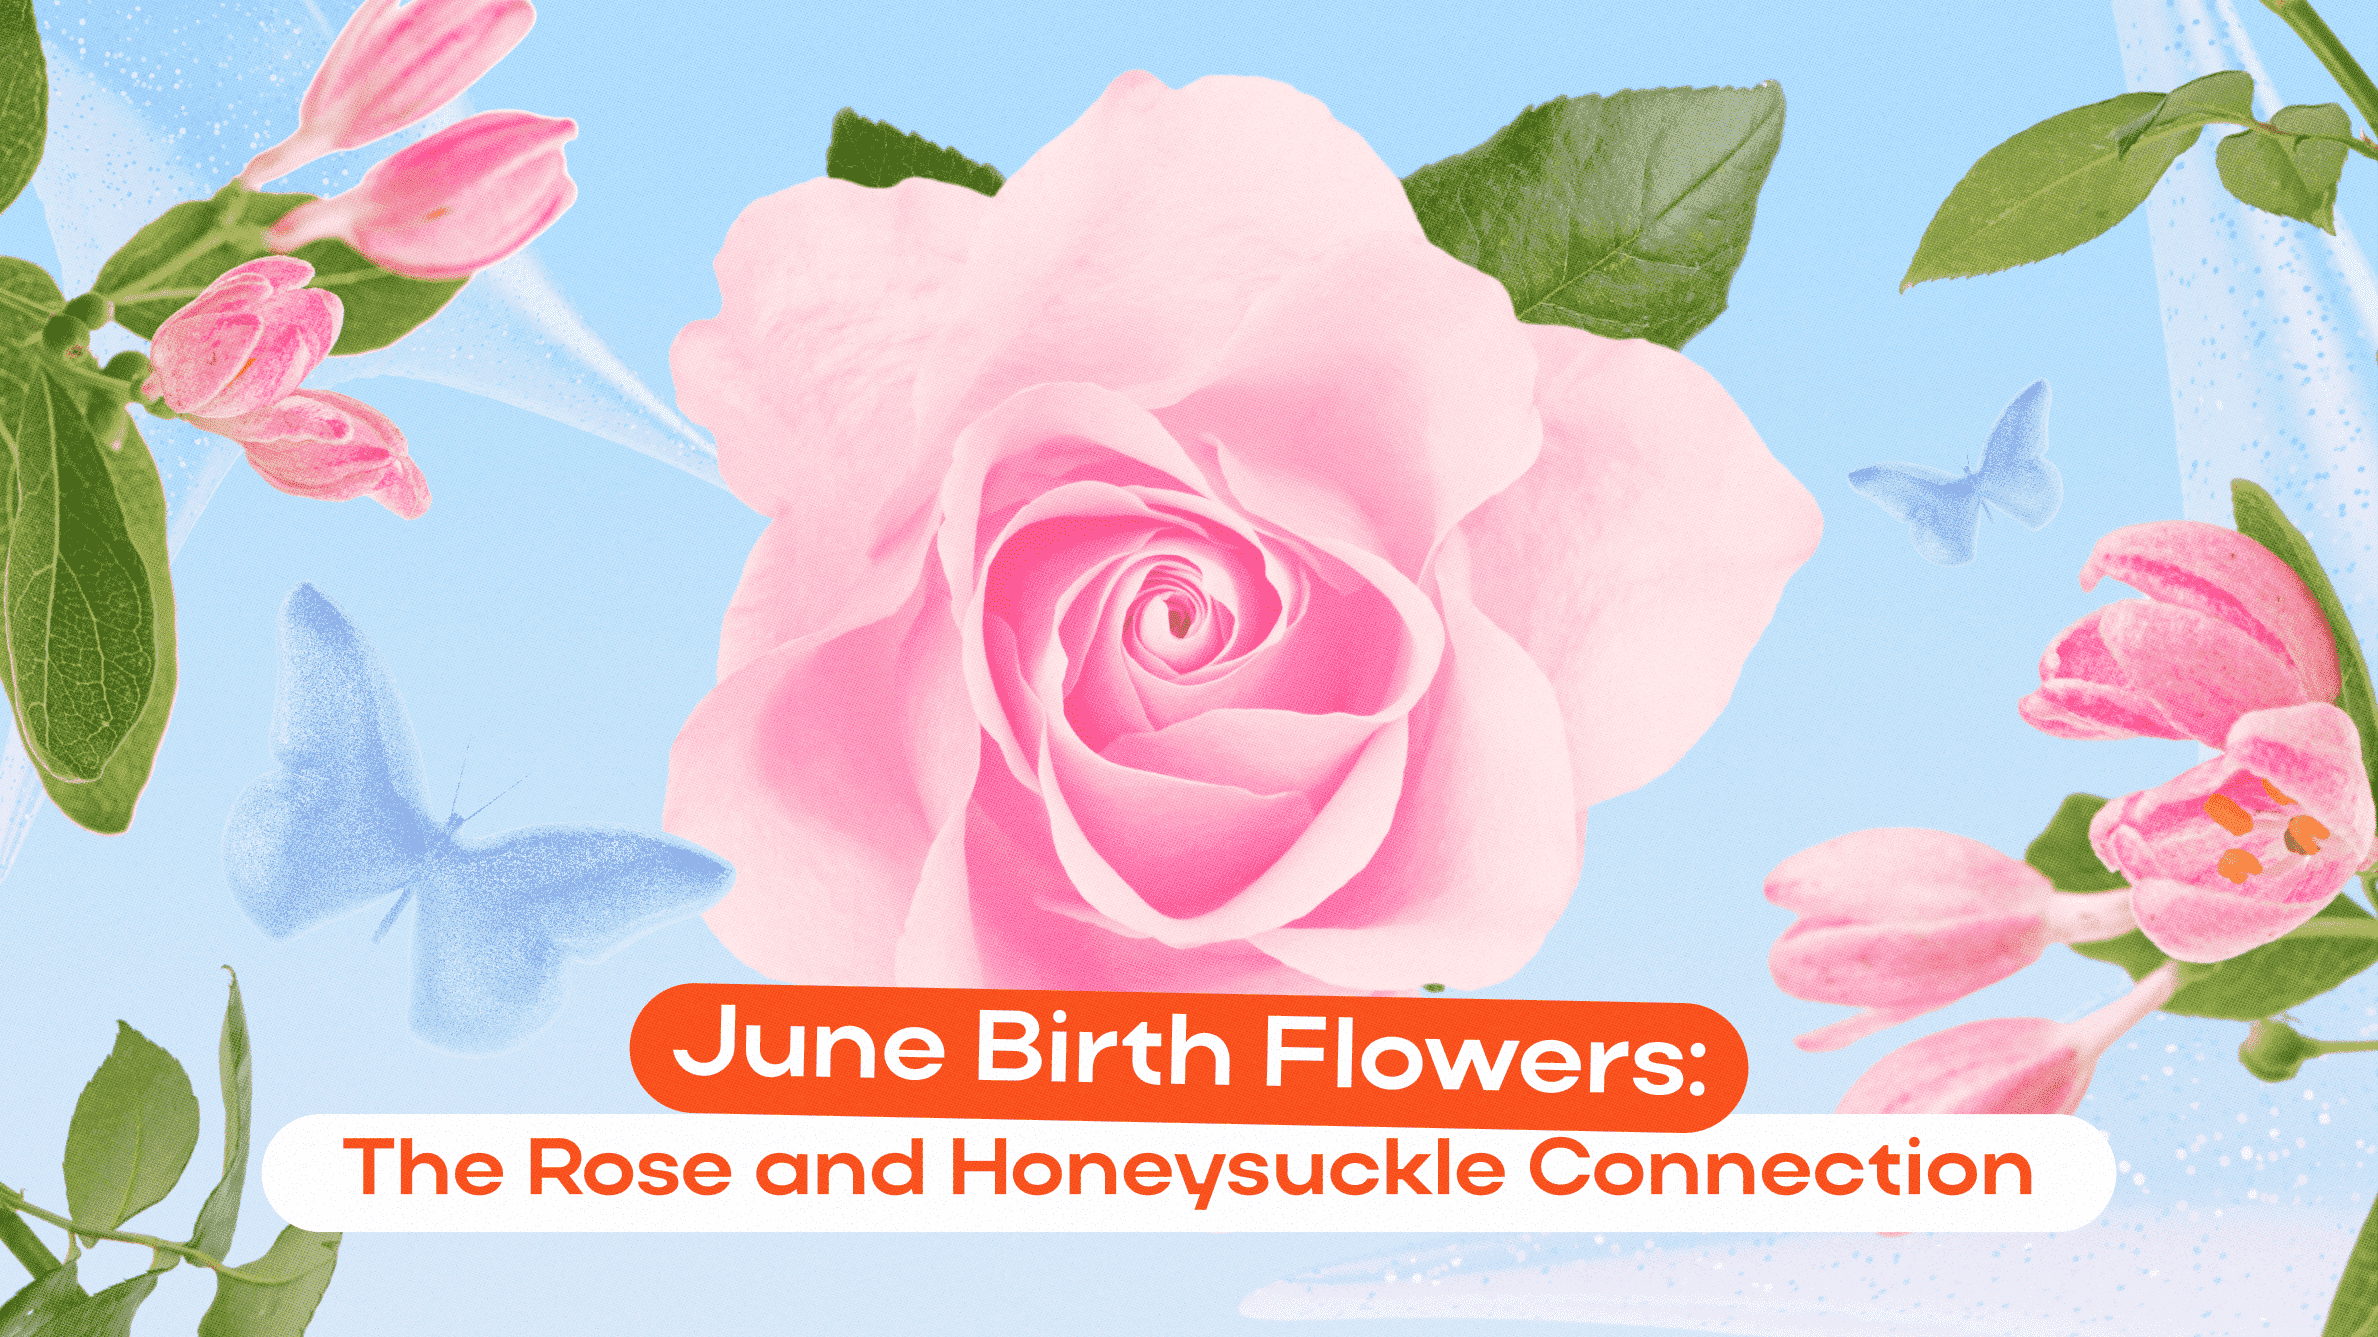 June Birth Flowers: The Rose and Honeysuckle Connection